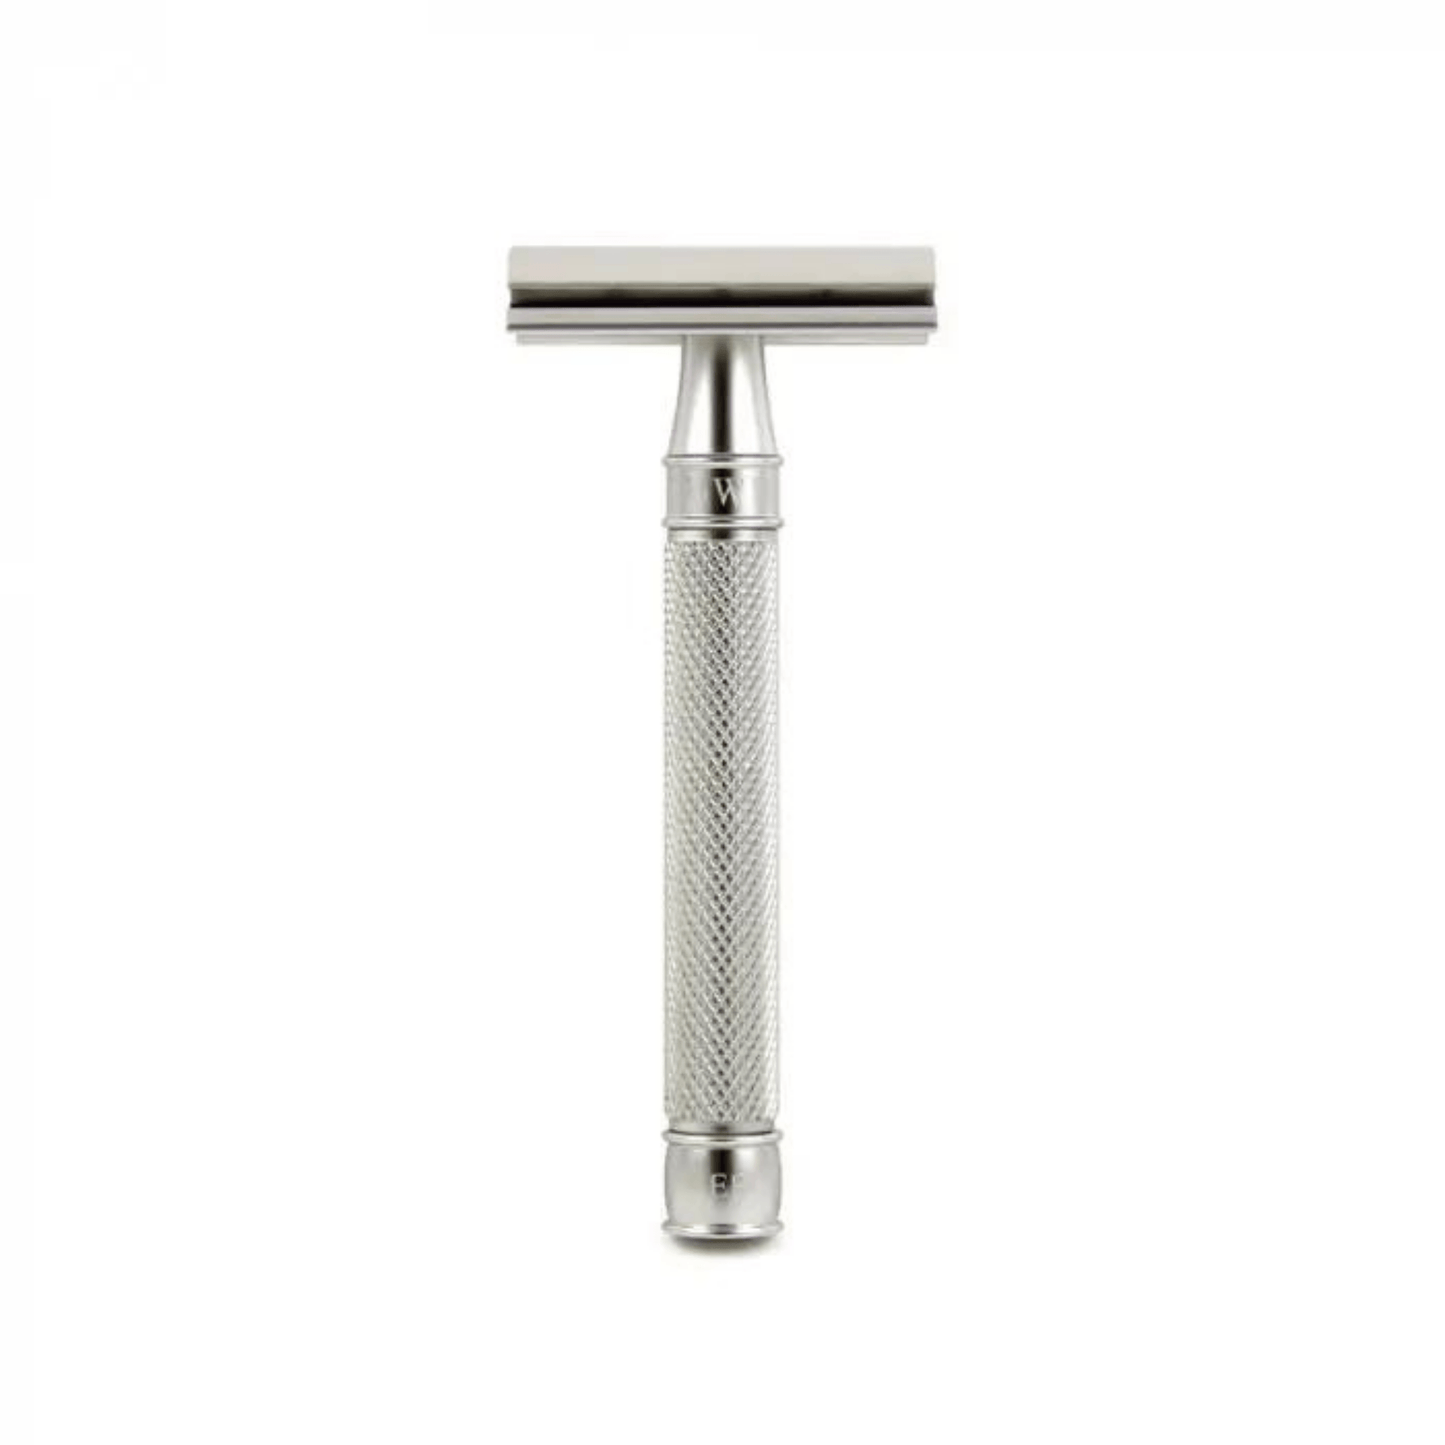 Edwin Jagger 3ONE6 Stainless Steel Knurled CLOSED Comb Safety Razor  #10082084